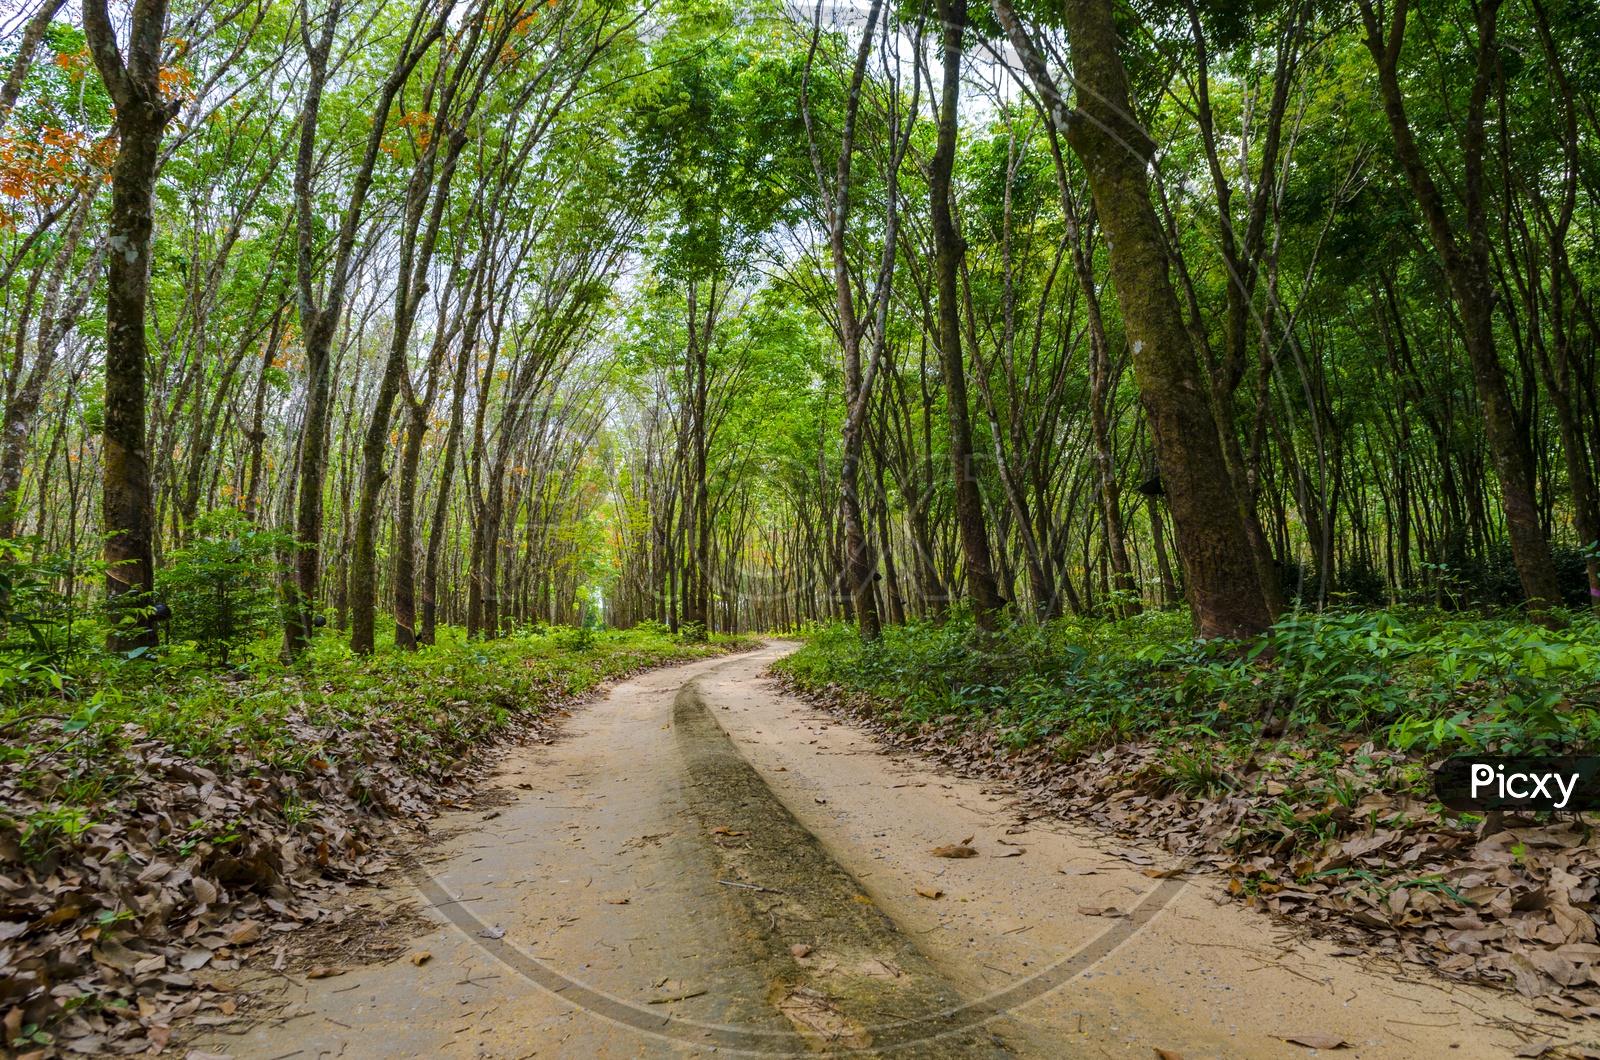 Closeup of  Pathways With Vehicle Tire Marks in Rubber Plantations With Rubber Trees On Both Sides